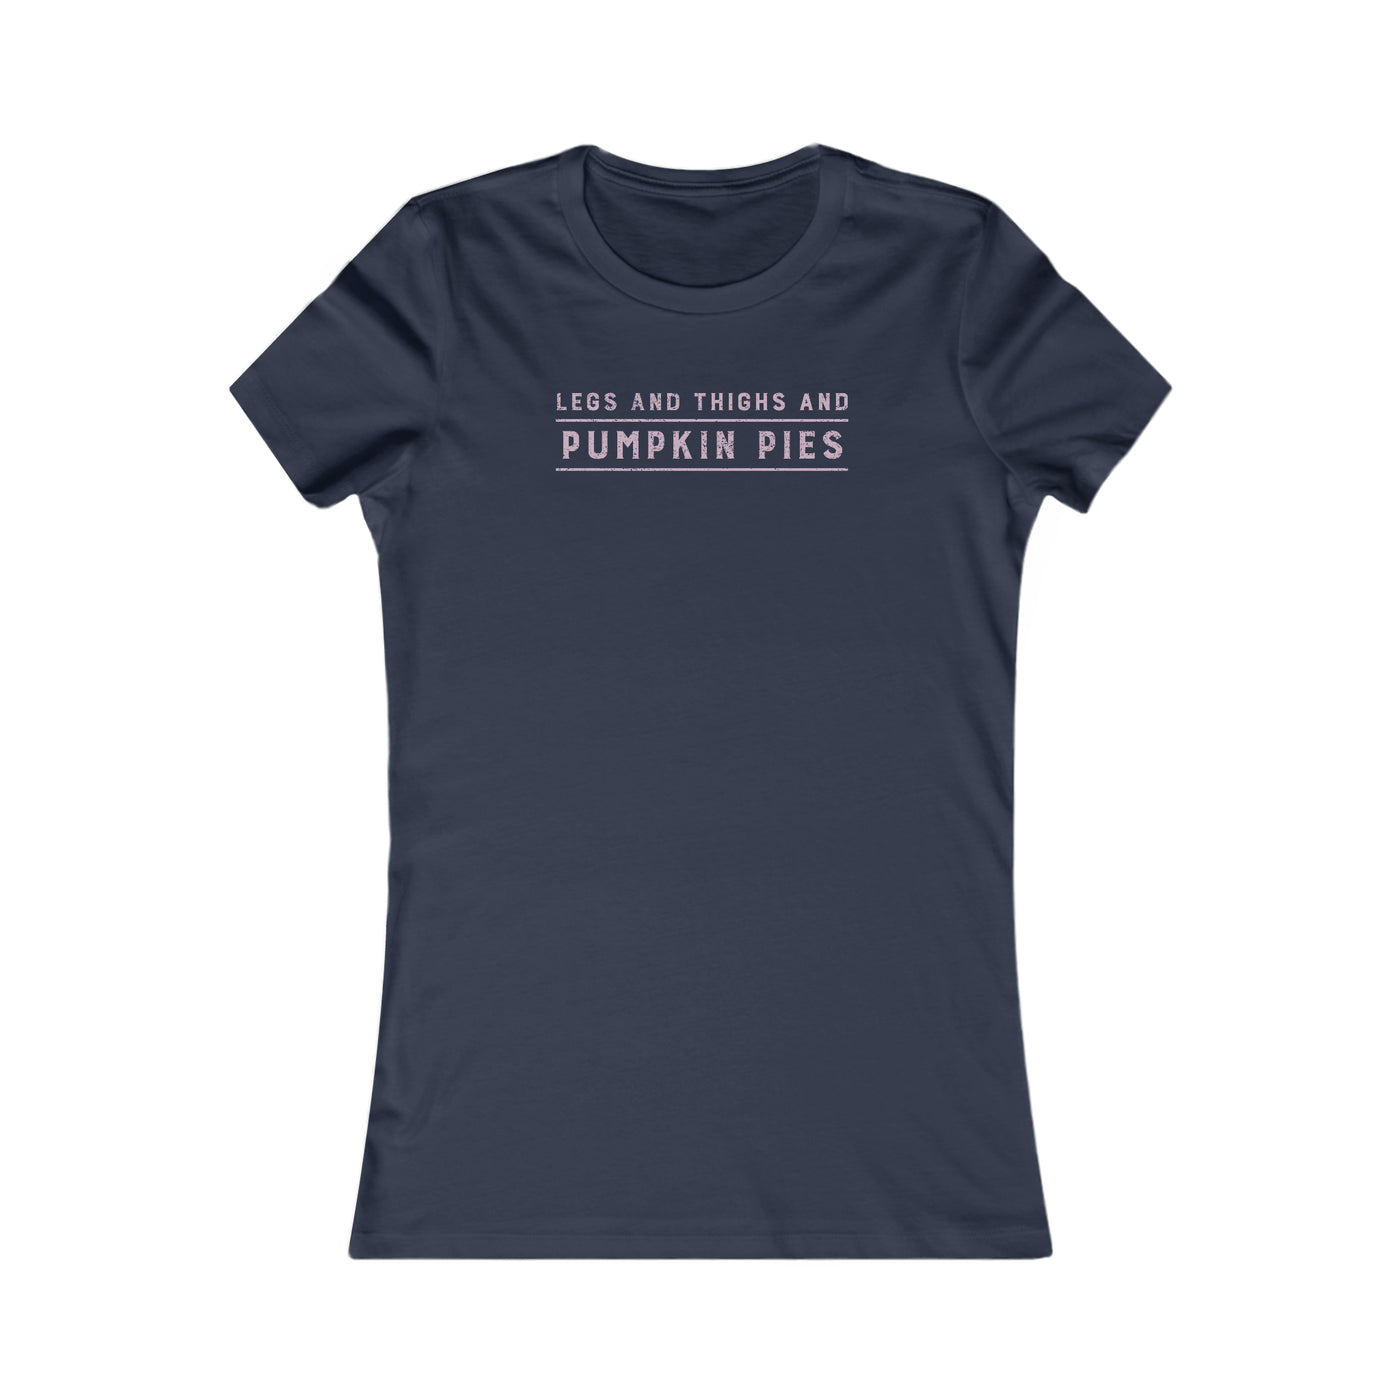 Legs And Thighs And Pumpkin Pies Women's Favorite Tee